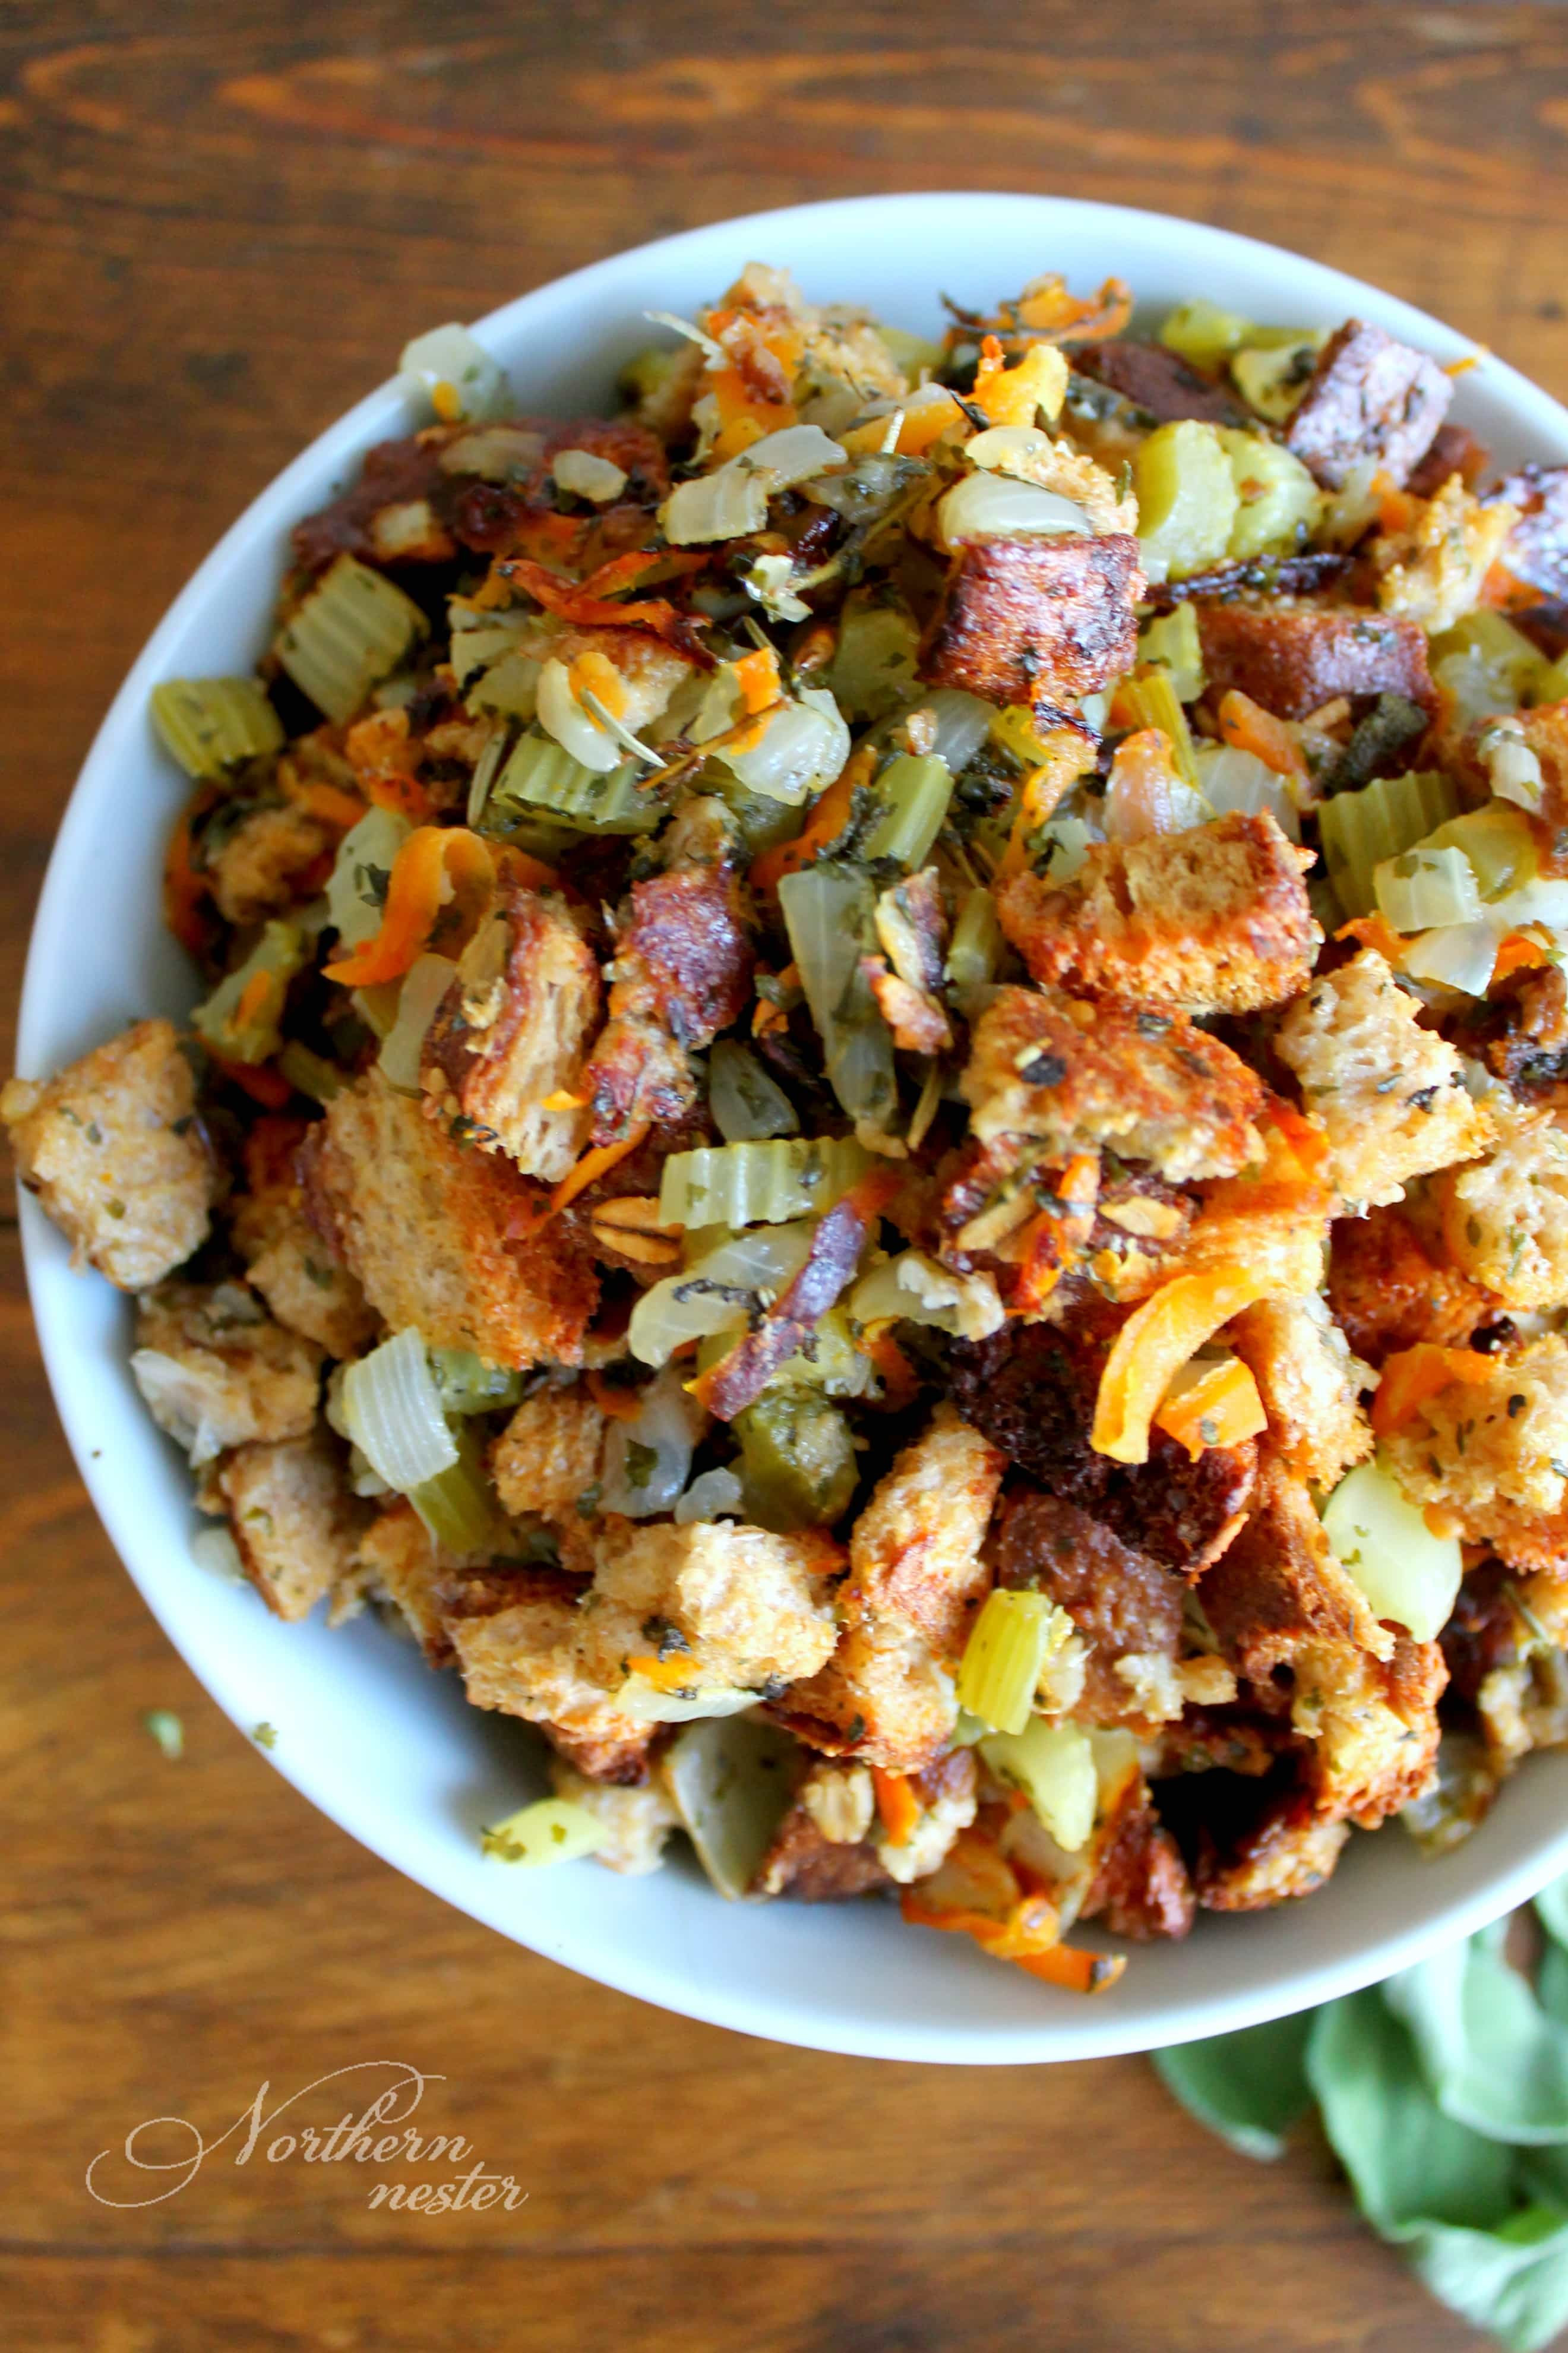 Healthy Thanksgiving Stuffing
 Trim Healthy Mama friendly Stuffing